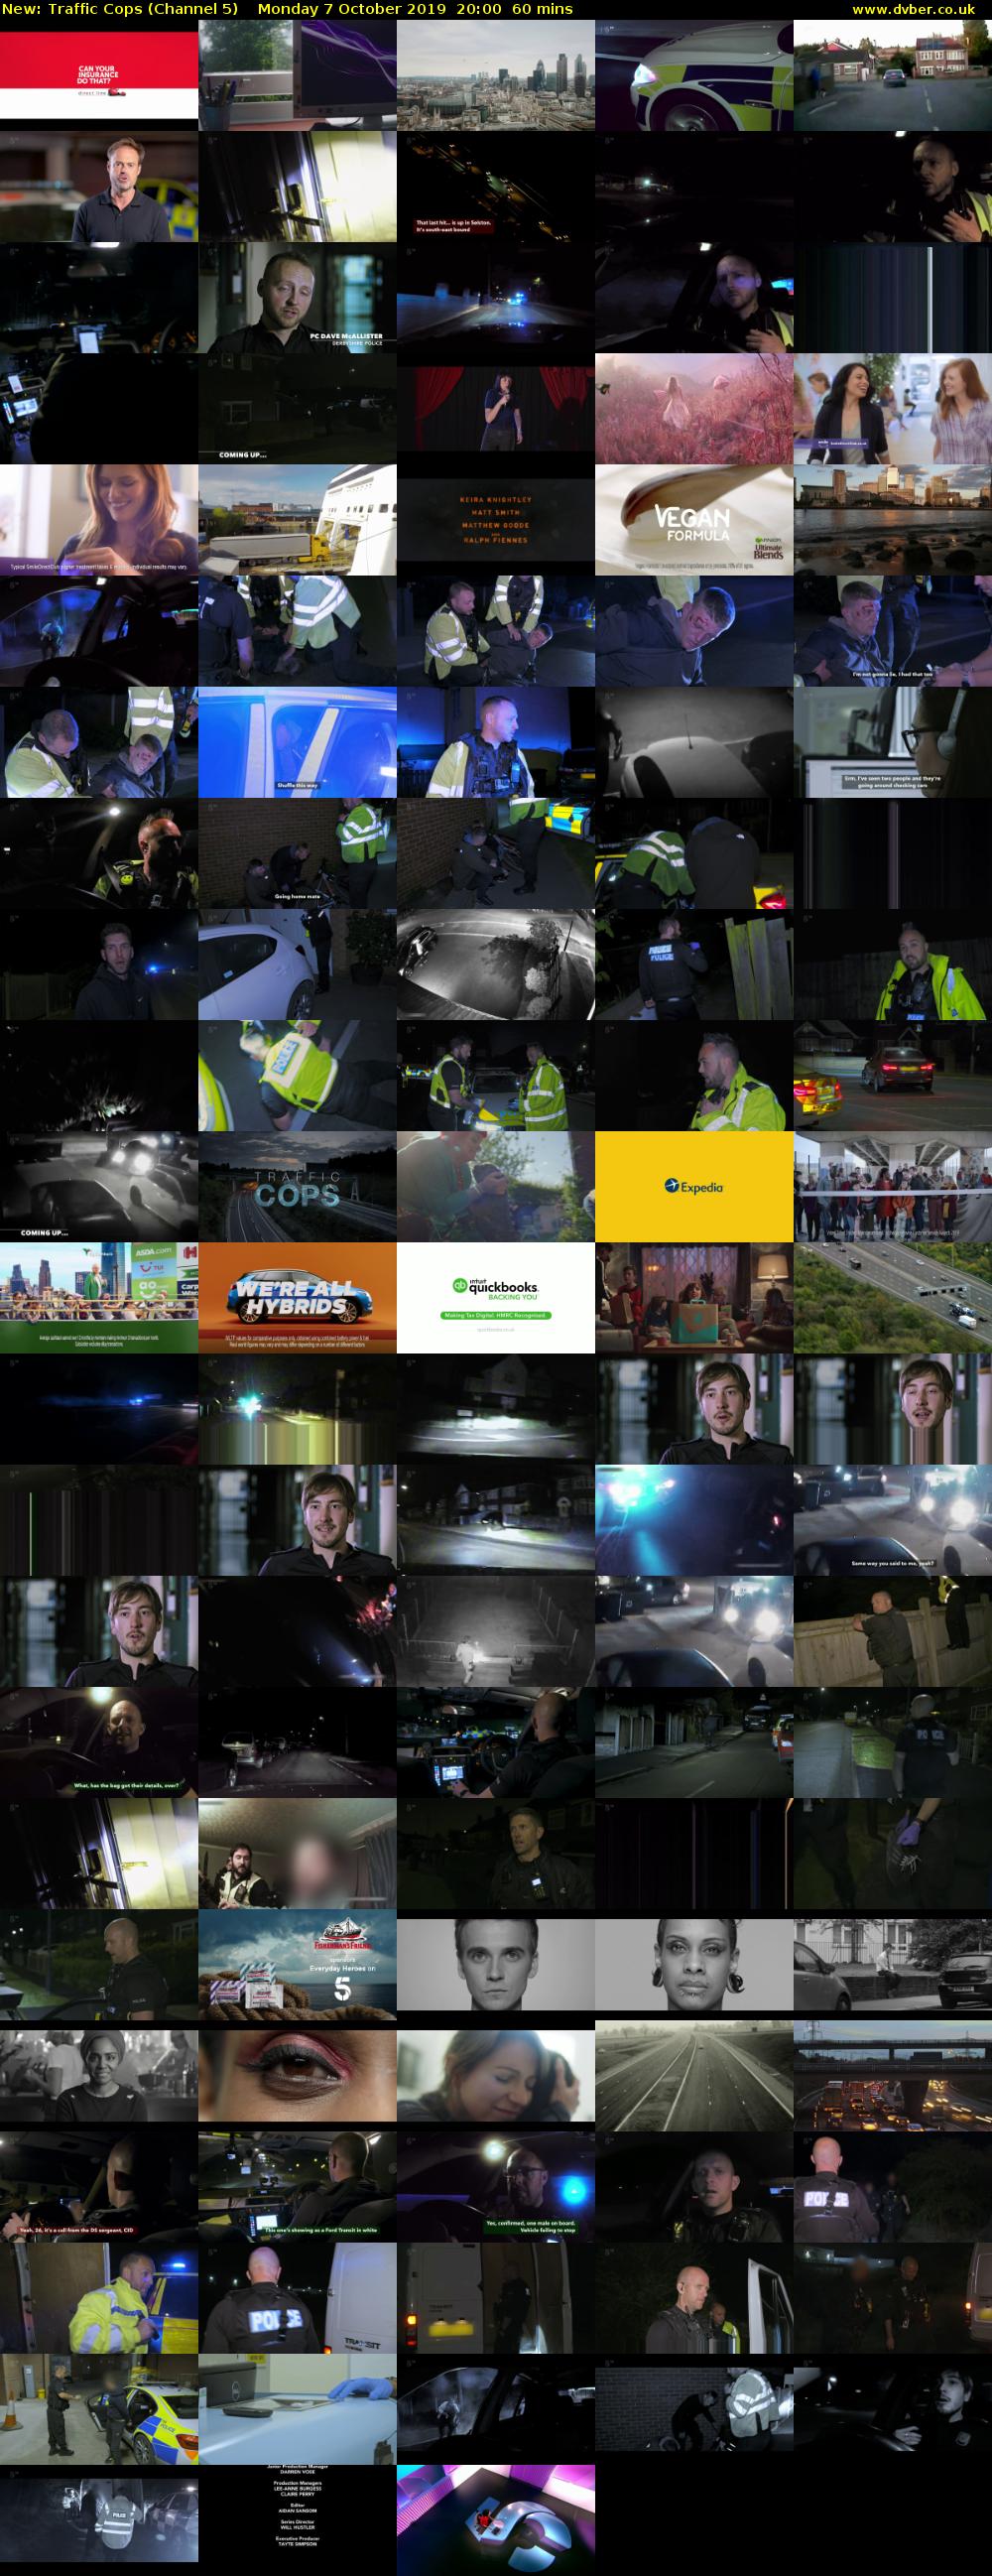 Traffic Cops (Channel 5) Monday 7 October 2019 20:00 - 21:00